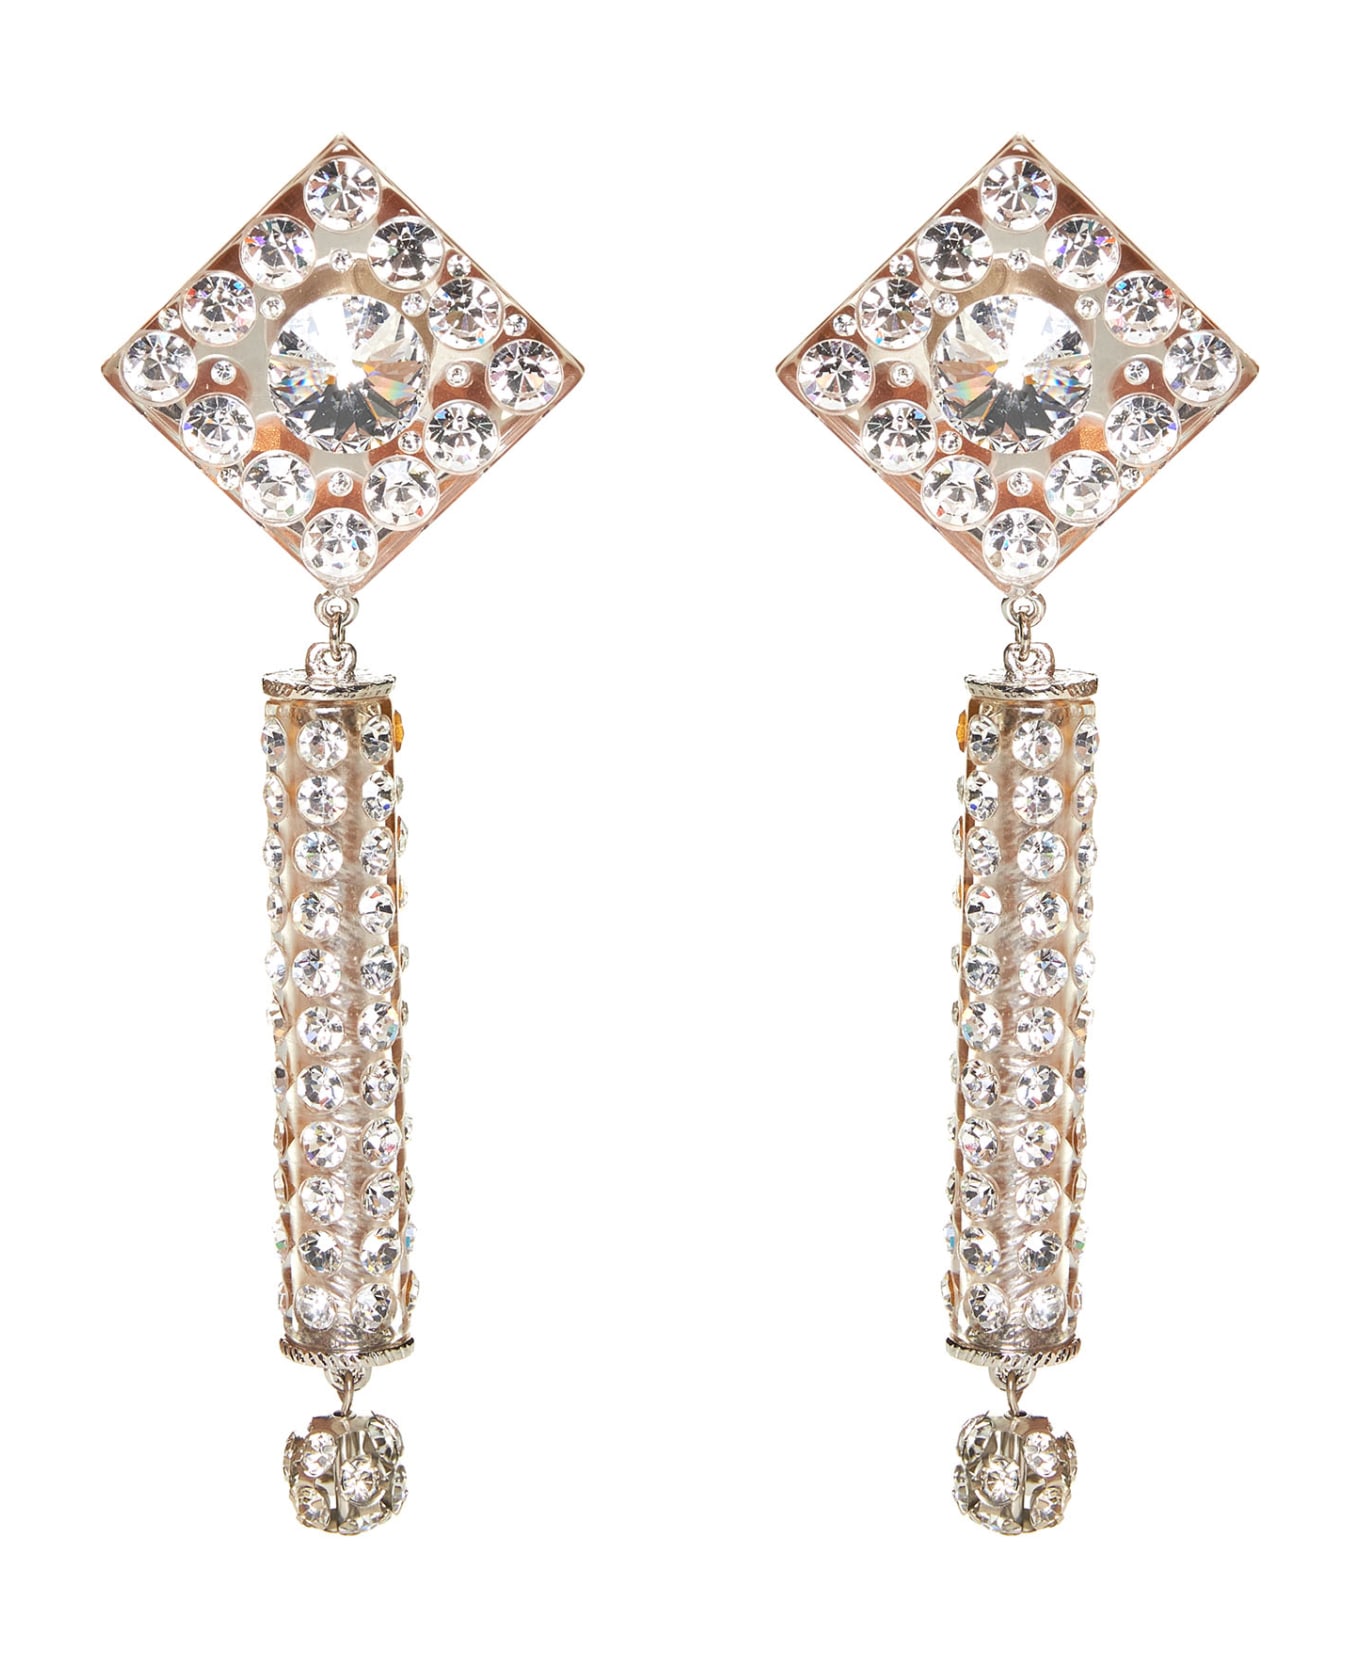 Alessandra Rich Crystal Earrings - Cry silver